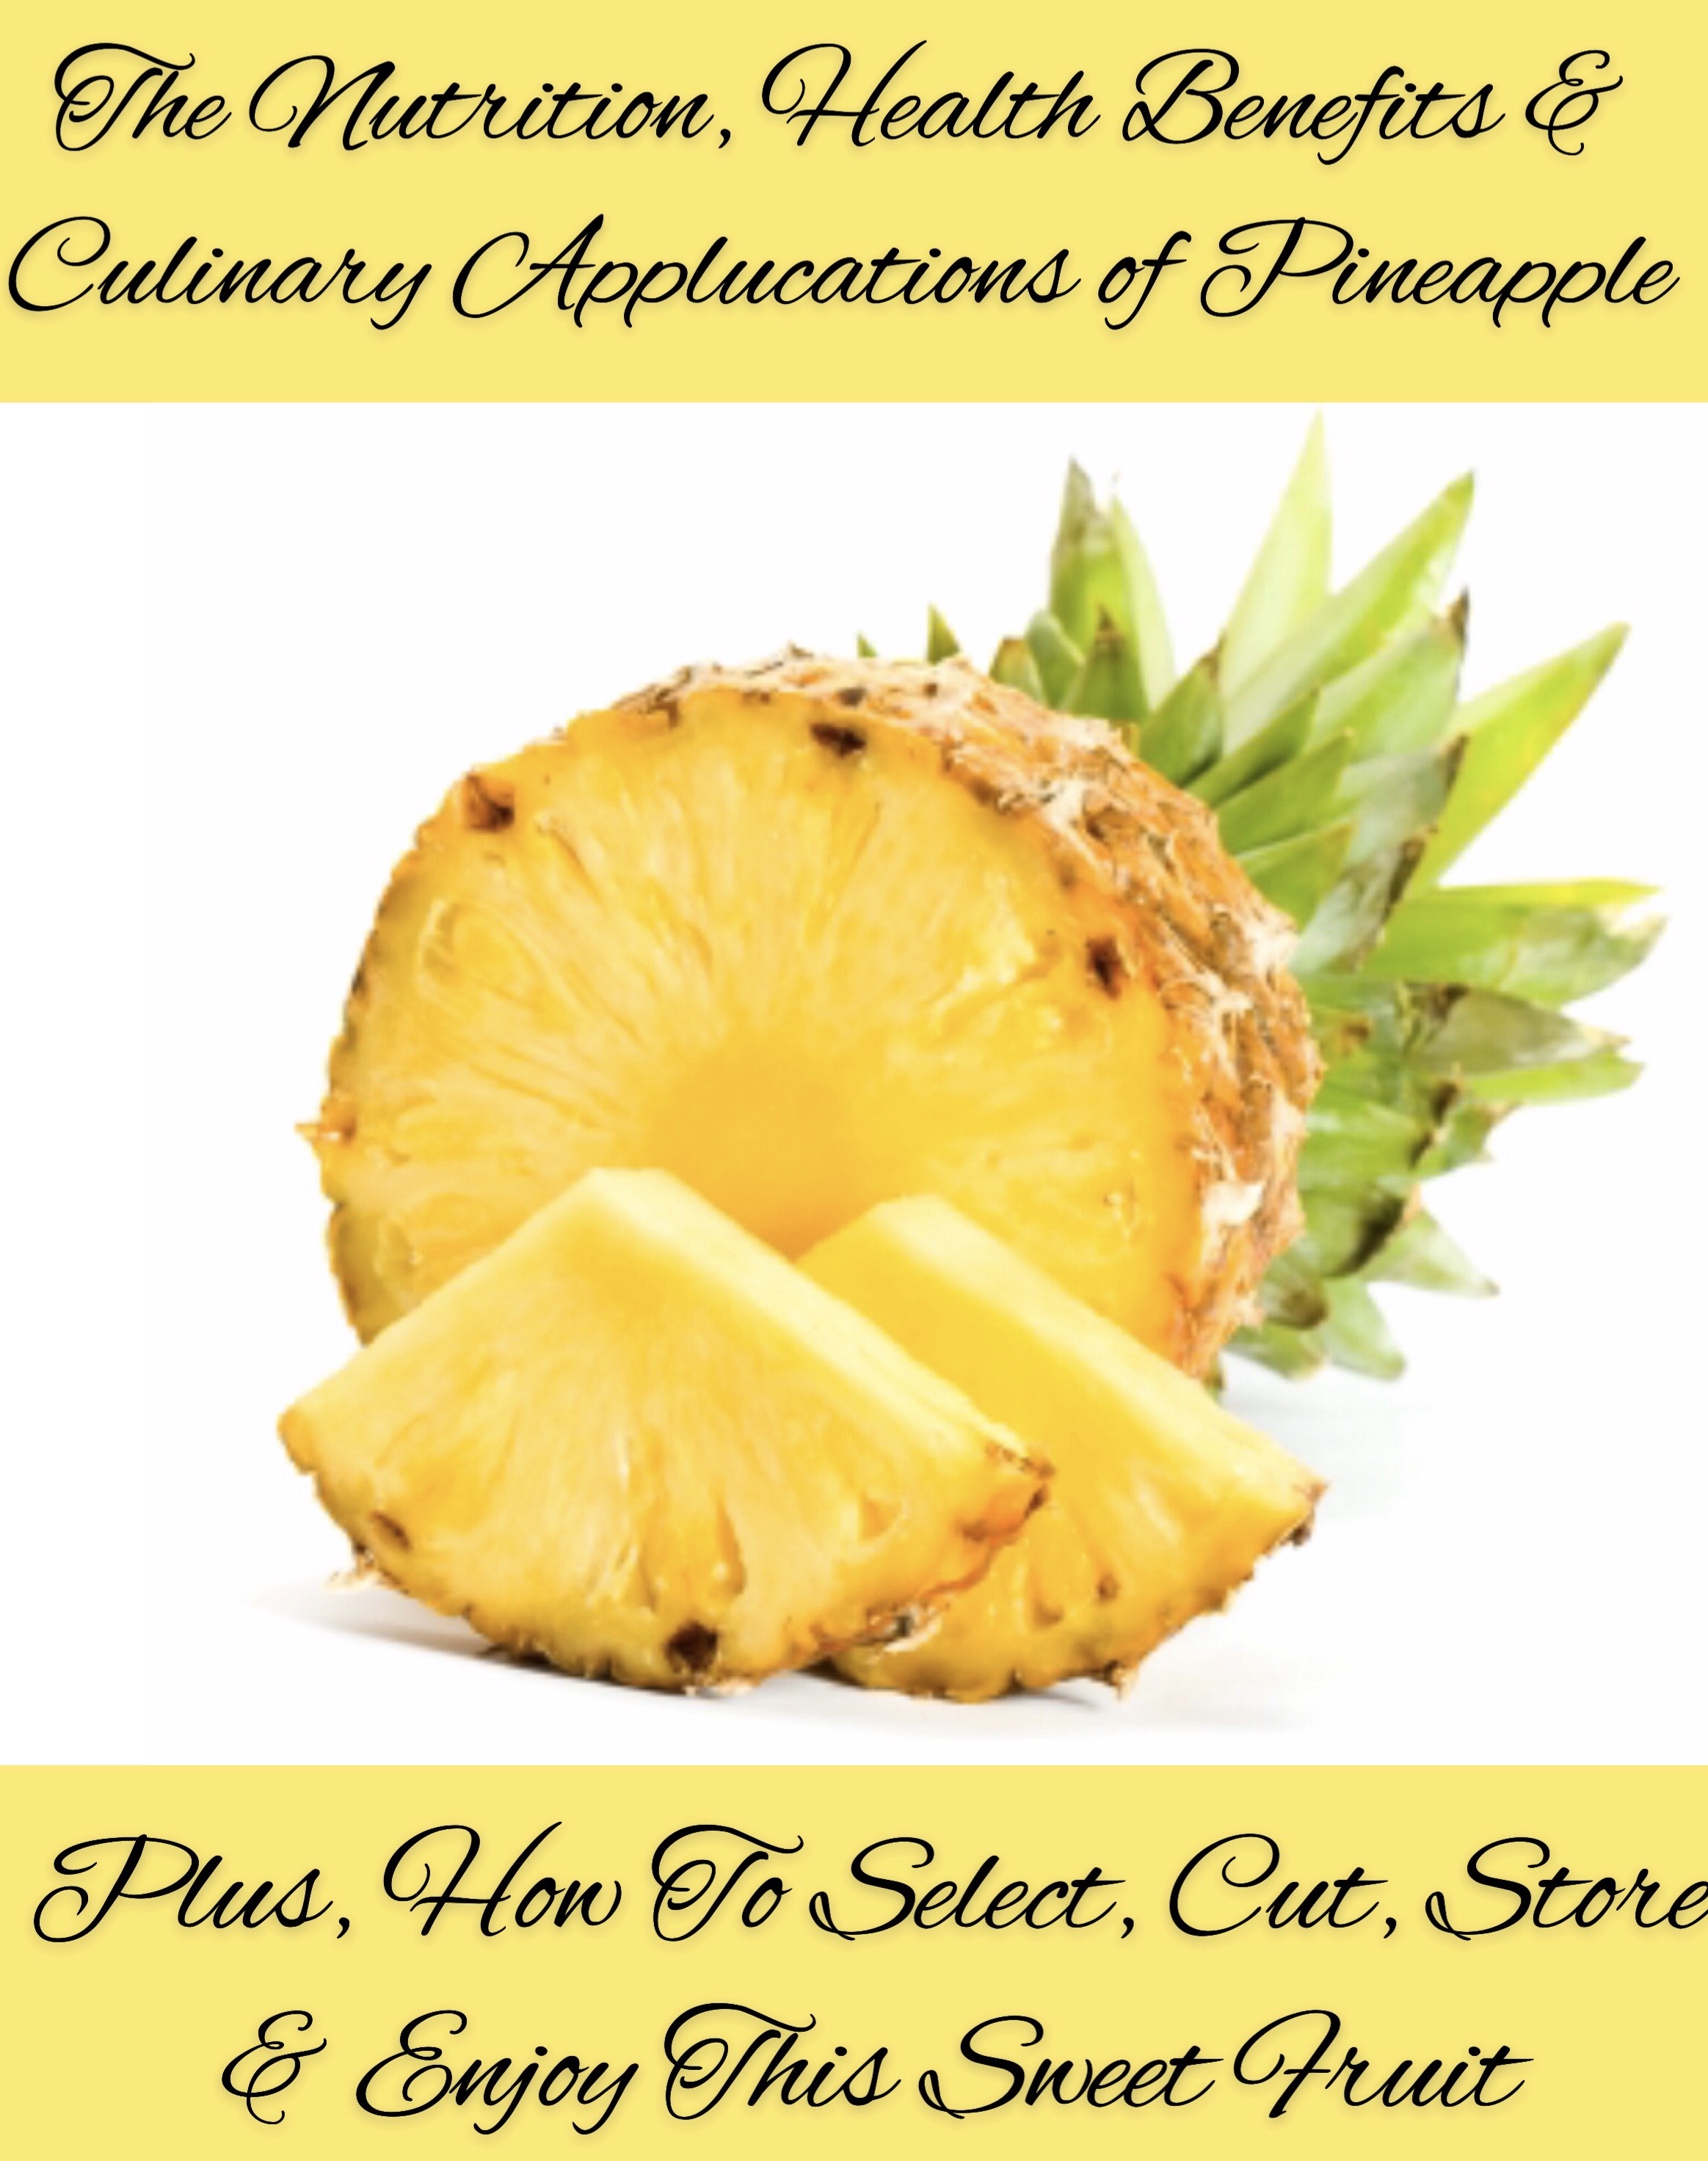 The Nutrition, Health Benefits and Culinary Applications of Pineapple - Heather Mangieri ...